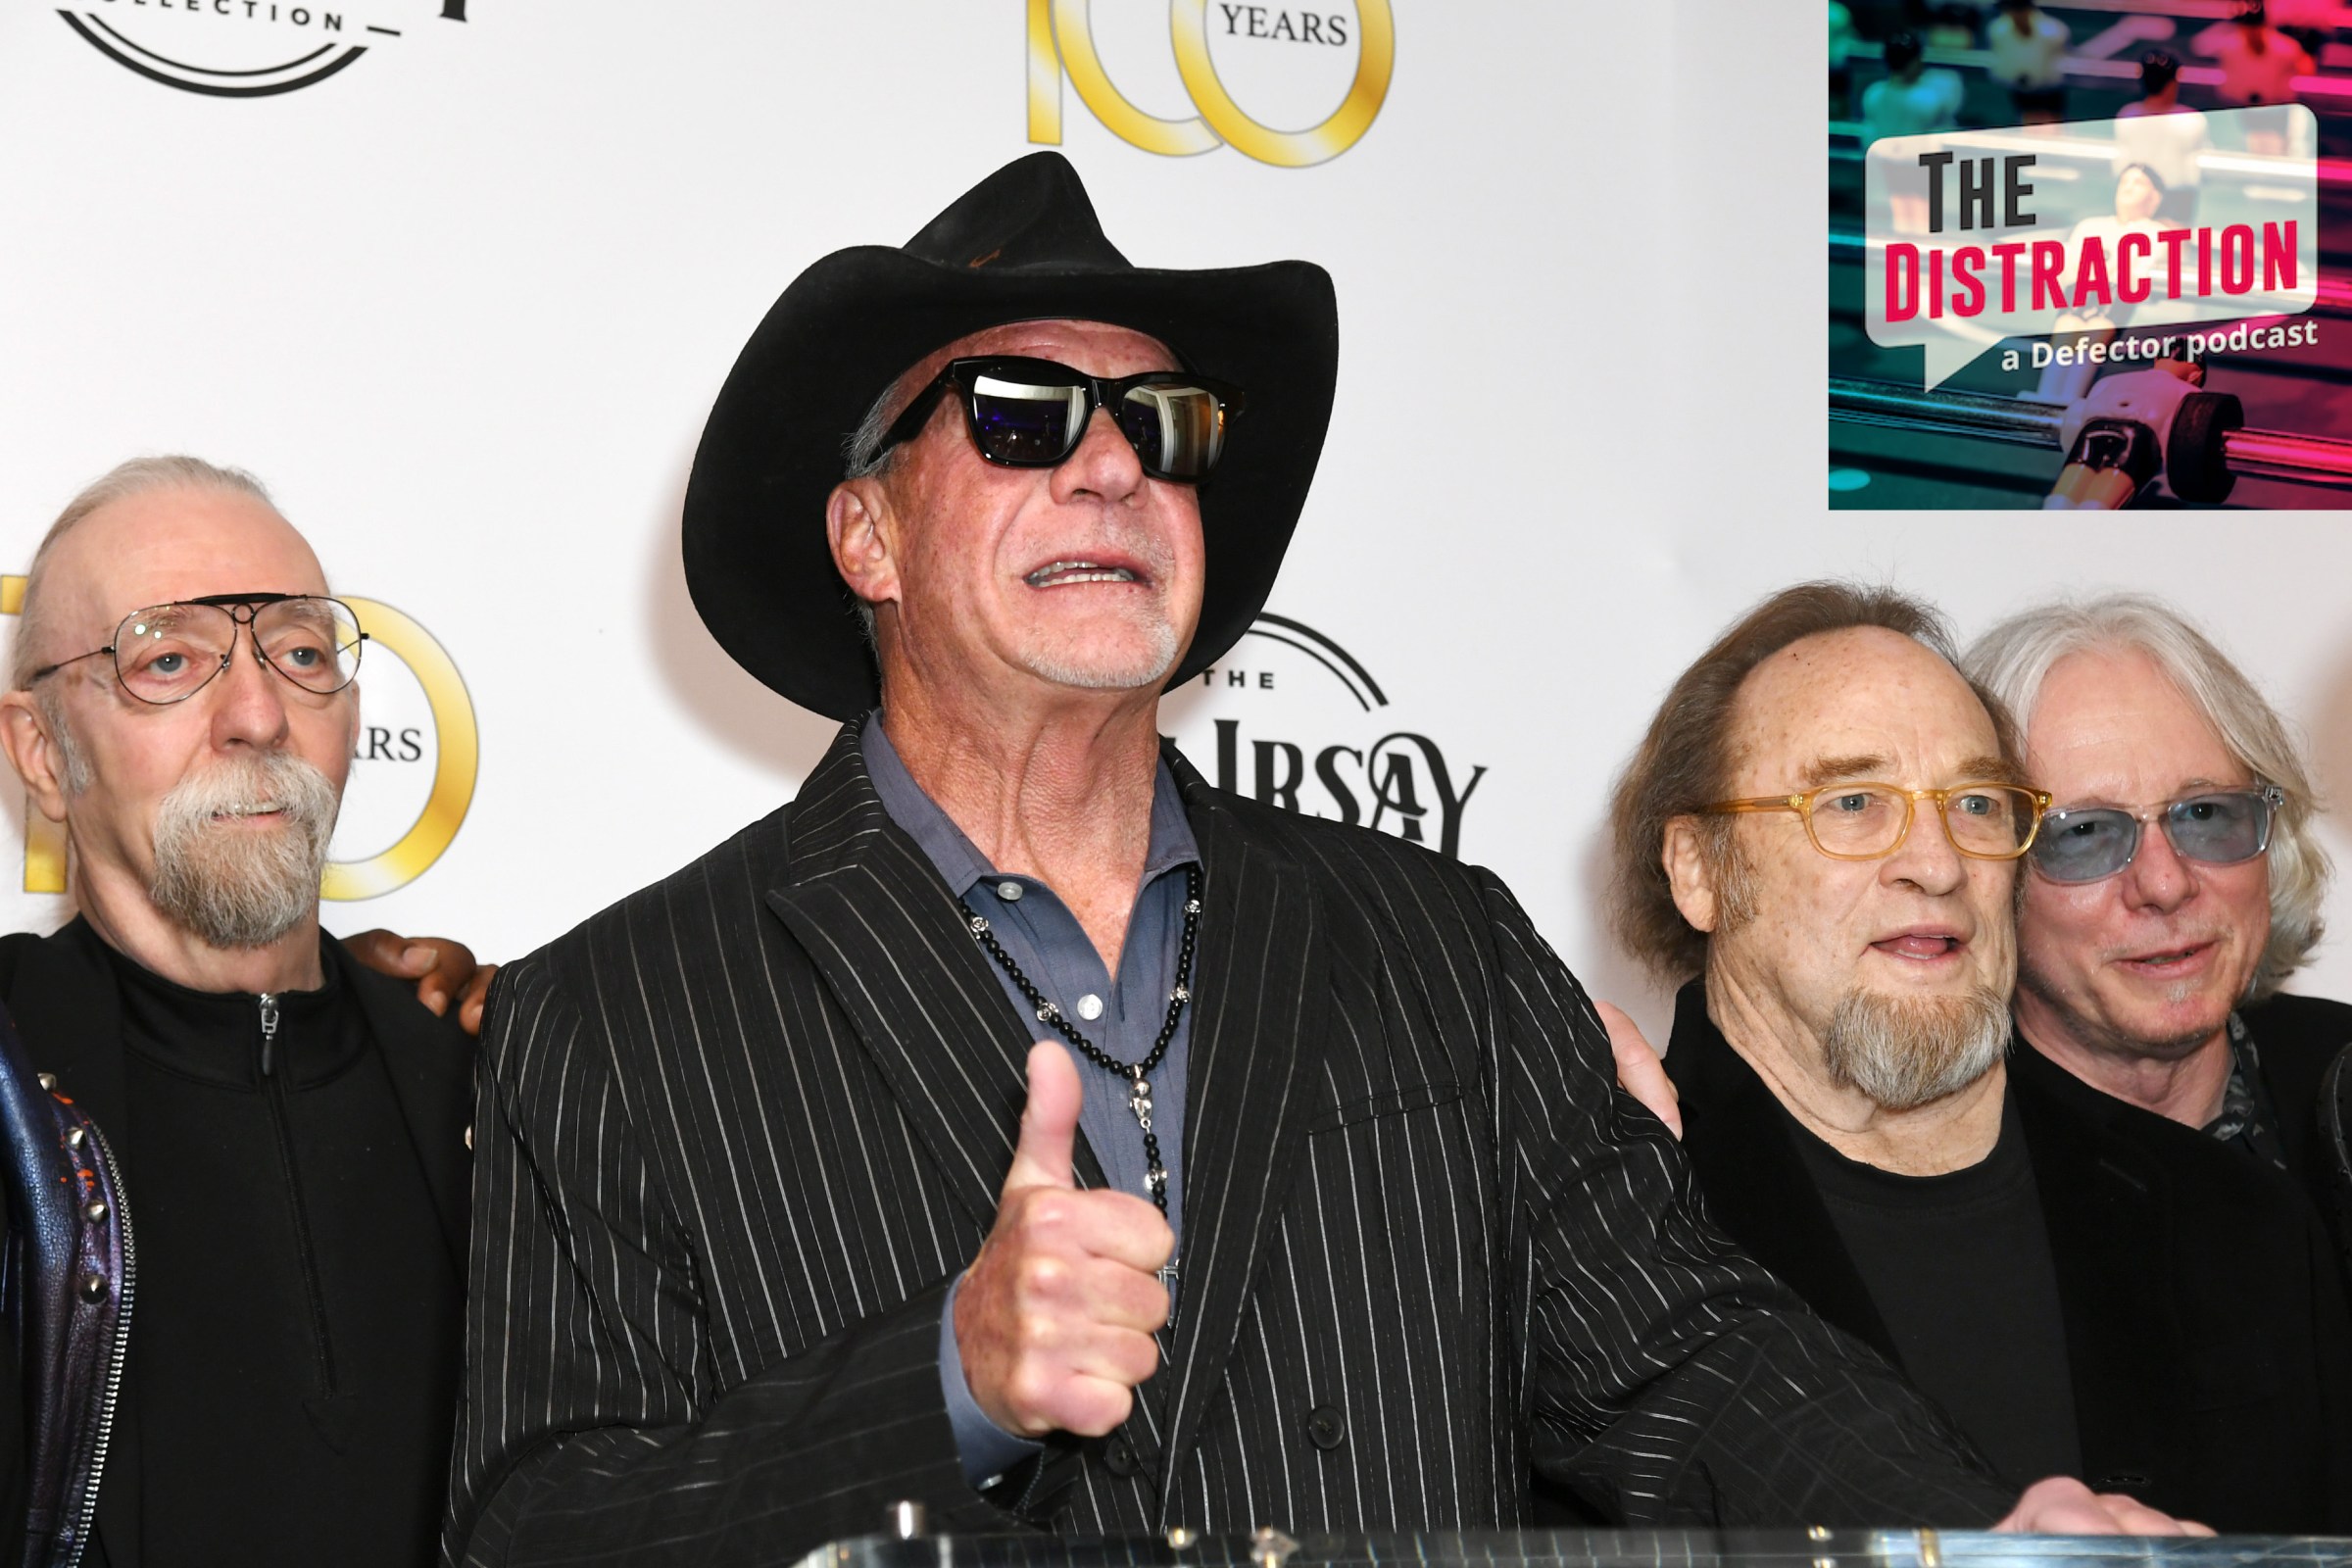 Colts owner Jim Irsay and various aged rock luminaries at the 100th birthday party for Jack Kerouac that Irsay hosted at the Beverly Hills Hotel.